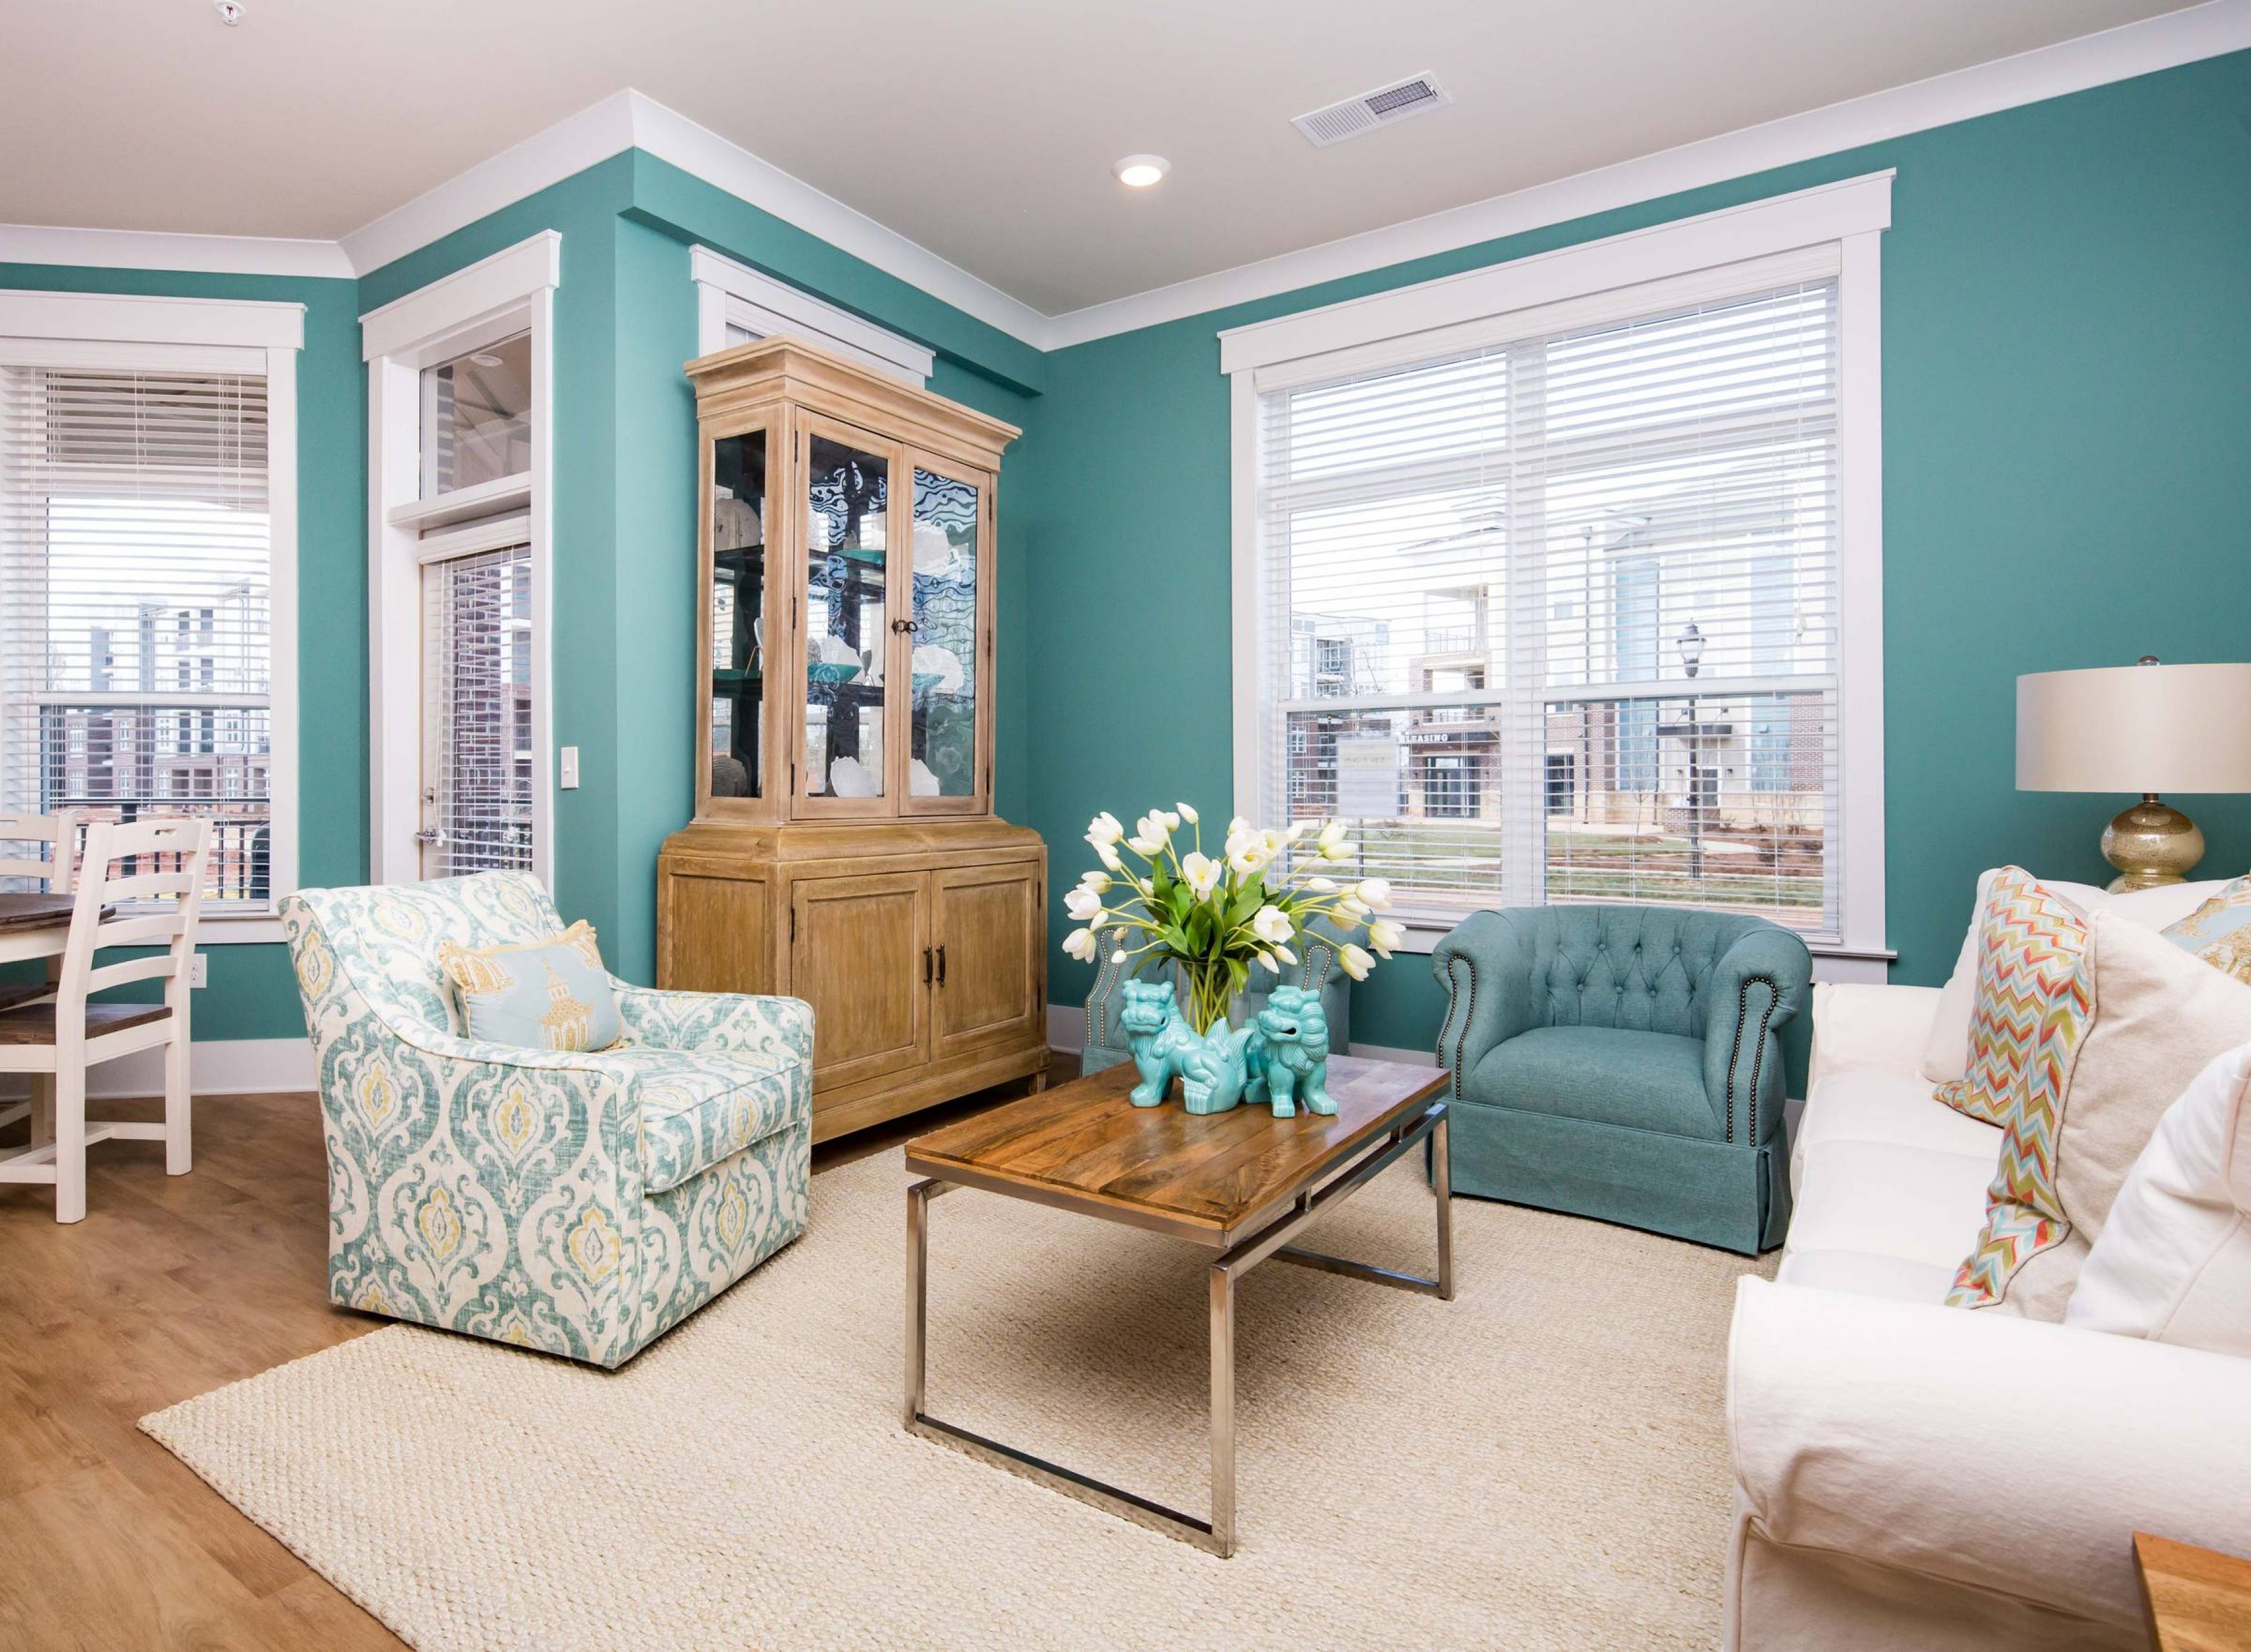 Apartments at holly crest luxury apartment interior with seating and aqua green accent wall